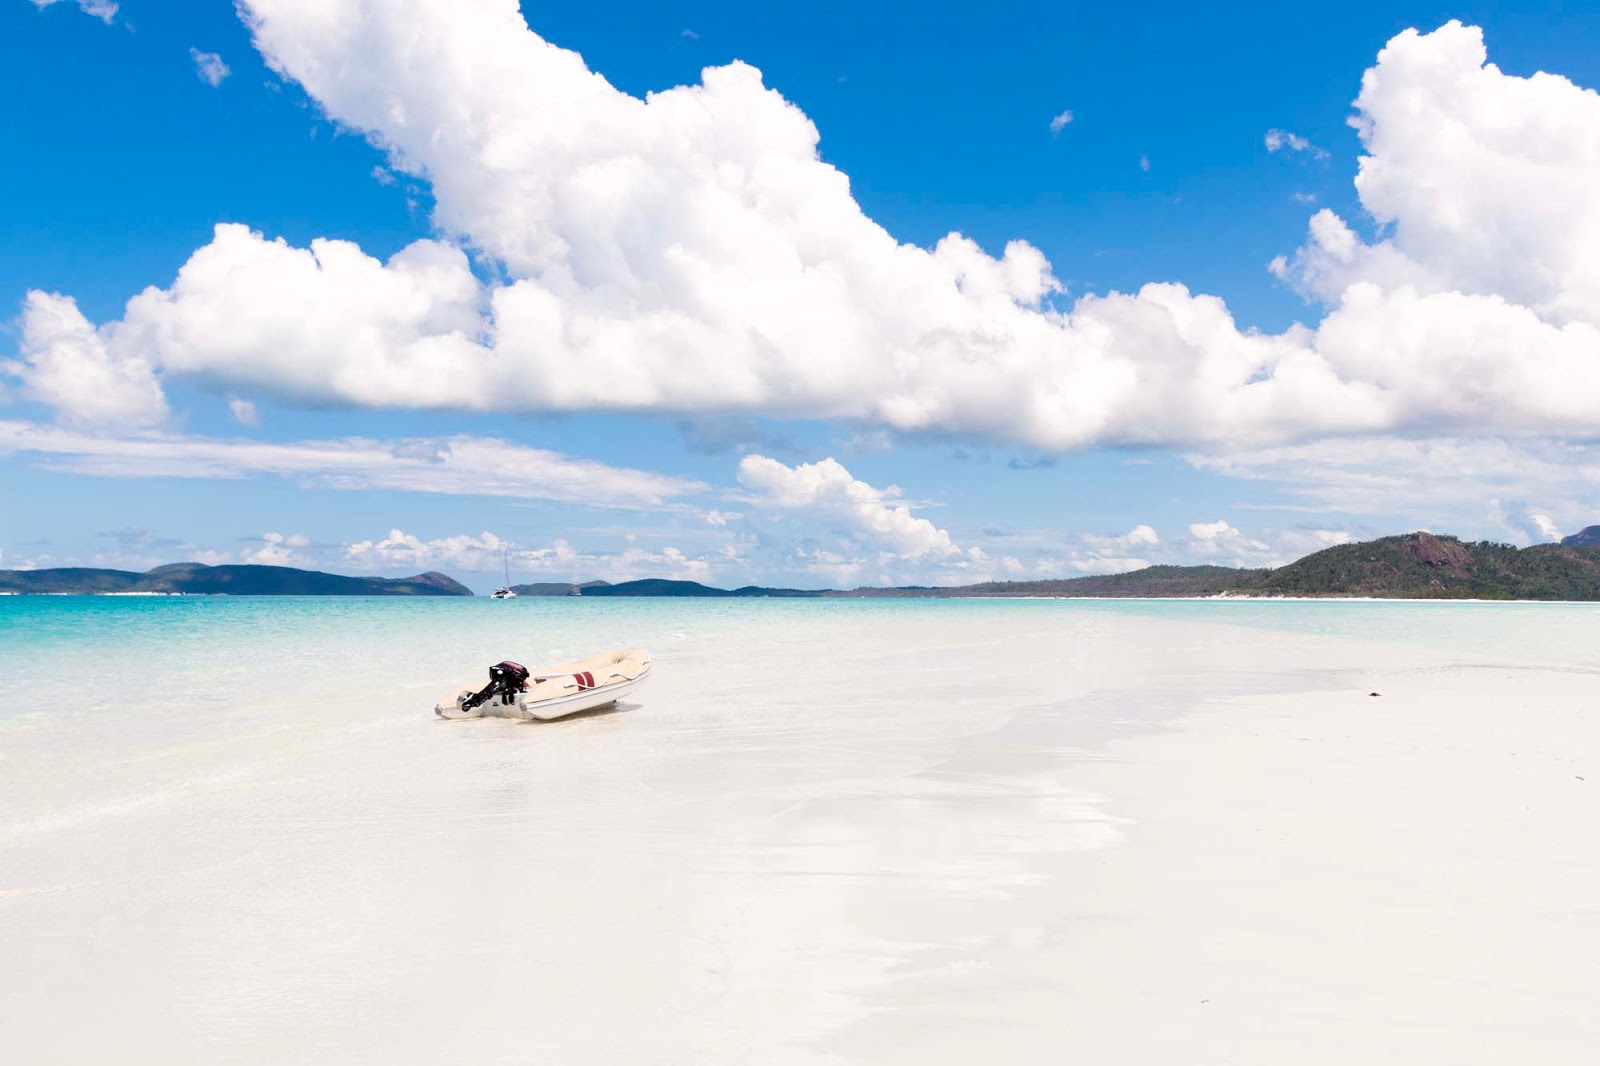 Camira sailing adventure from $209 pp ; The Best Whitehaven Beach Tour With Cruise Whitsundays Explore Shaw